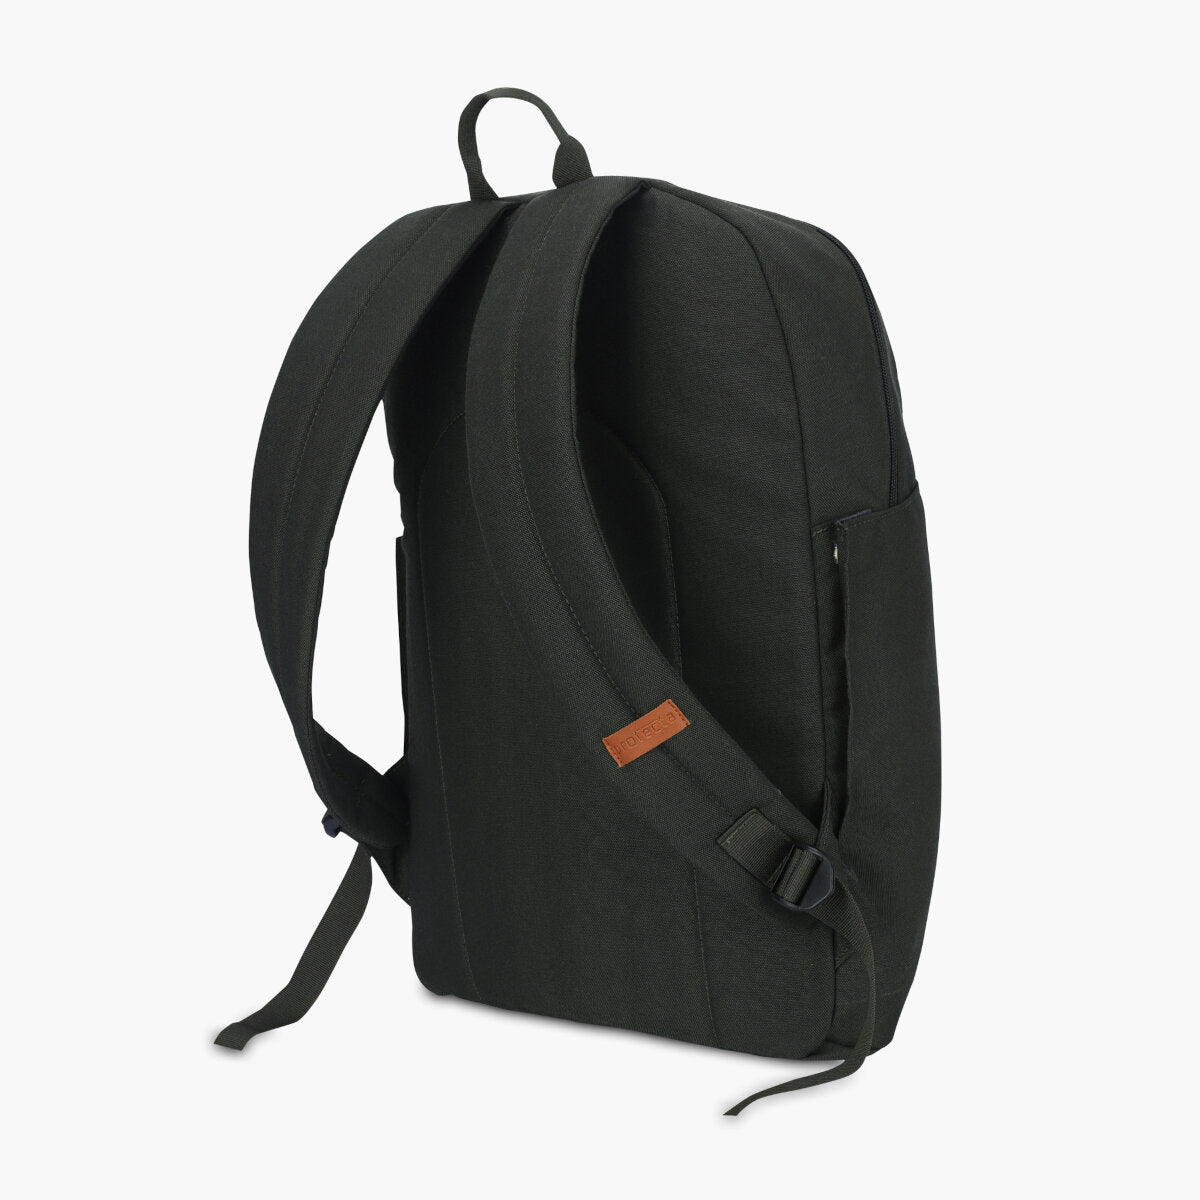 Green | Protecta Strong Buzz Laptop Backpack - 7